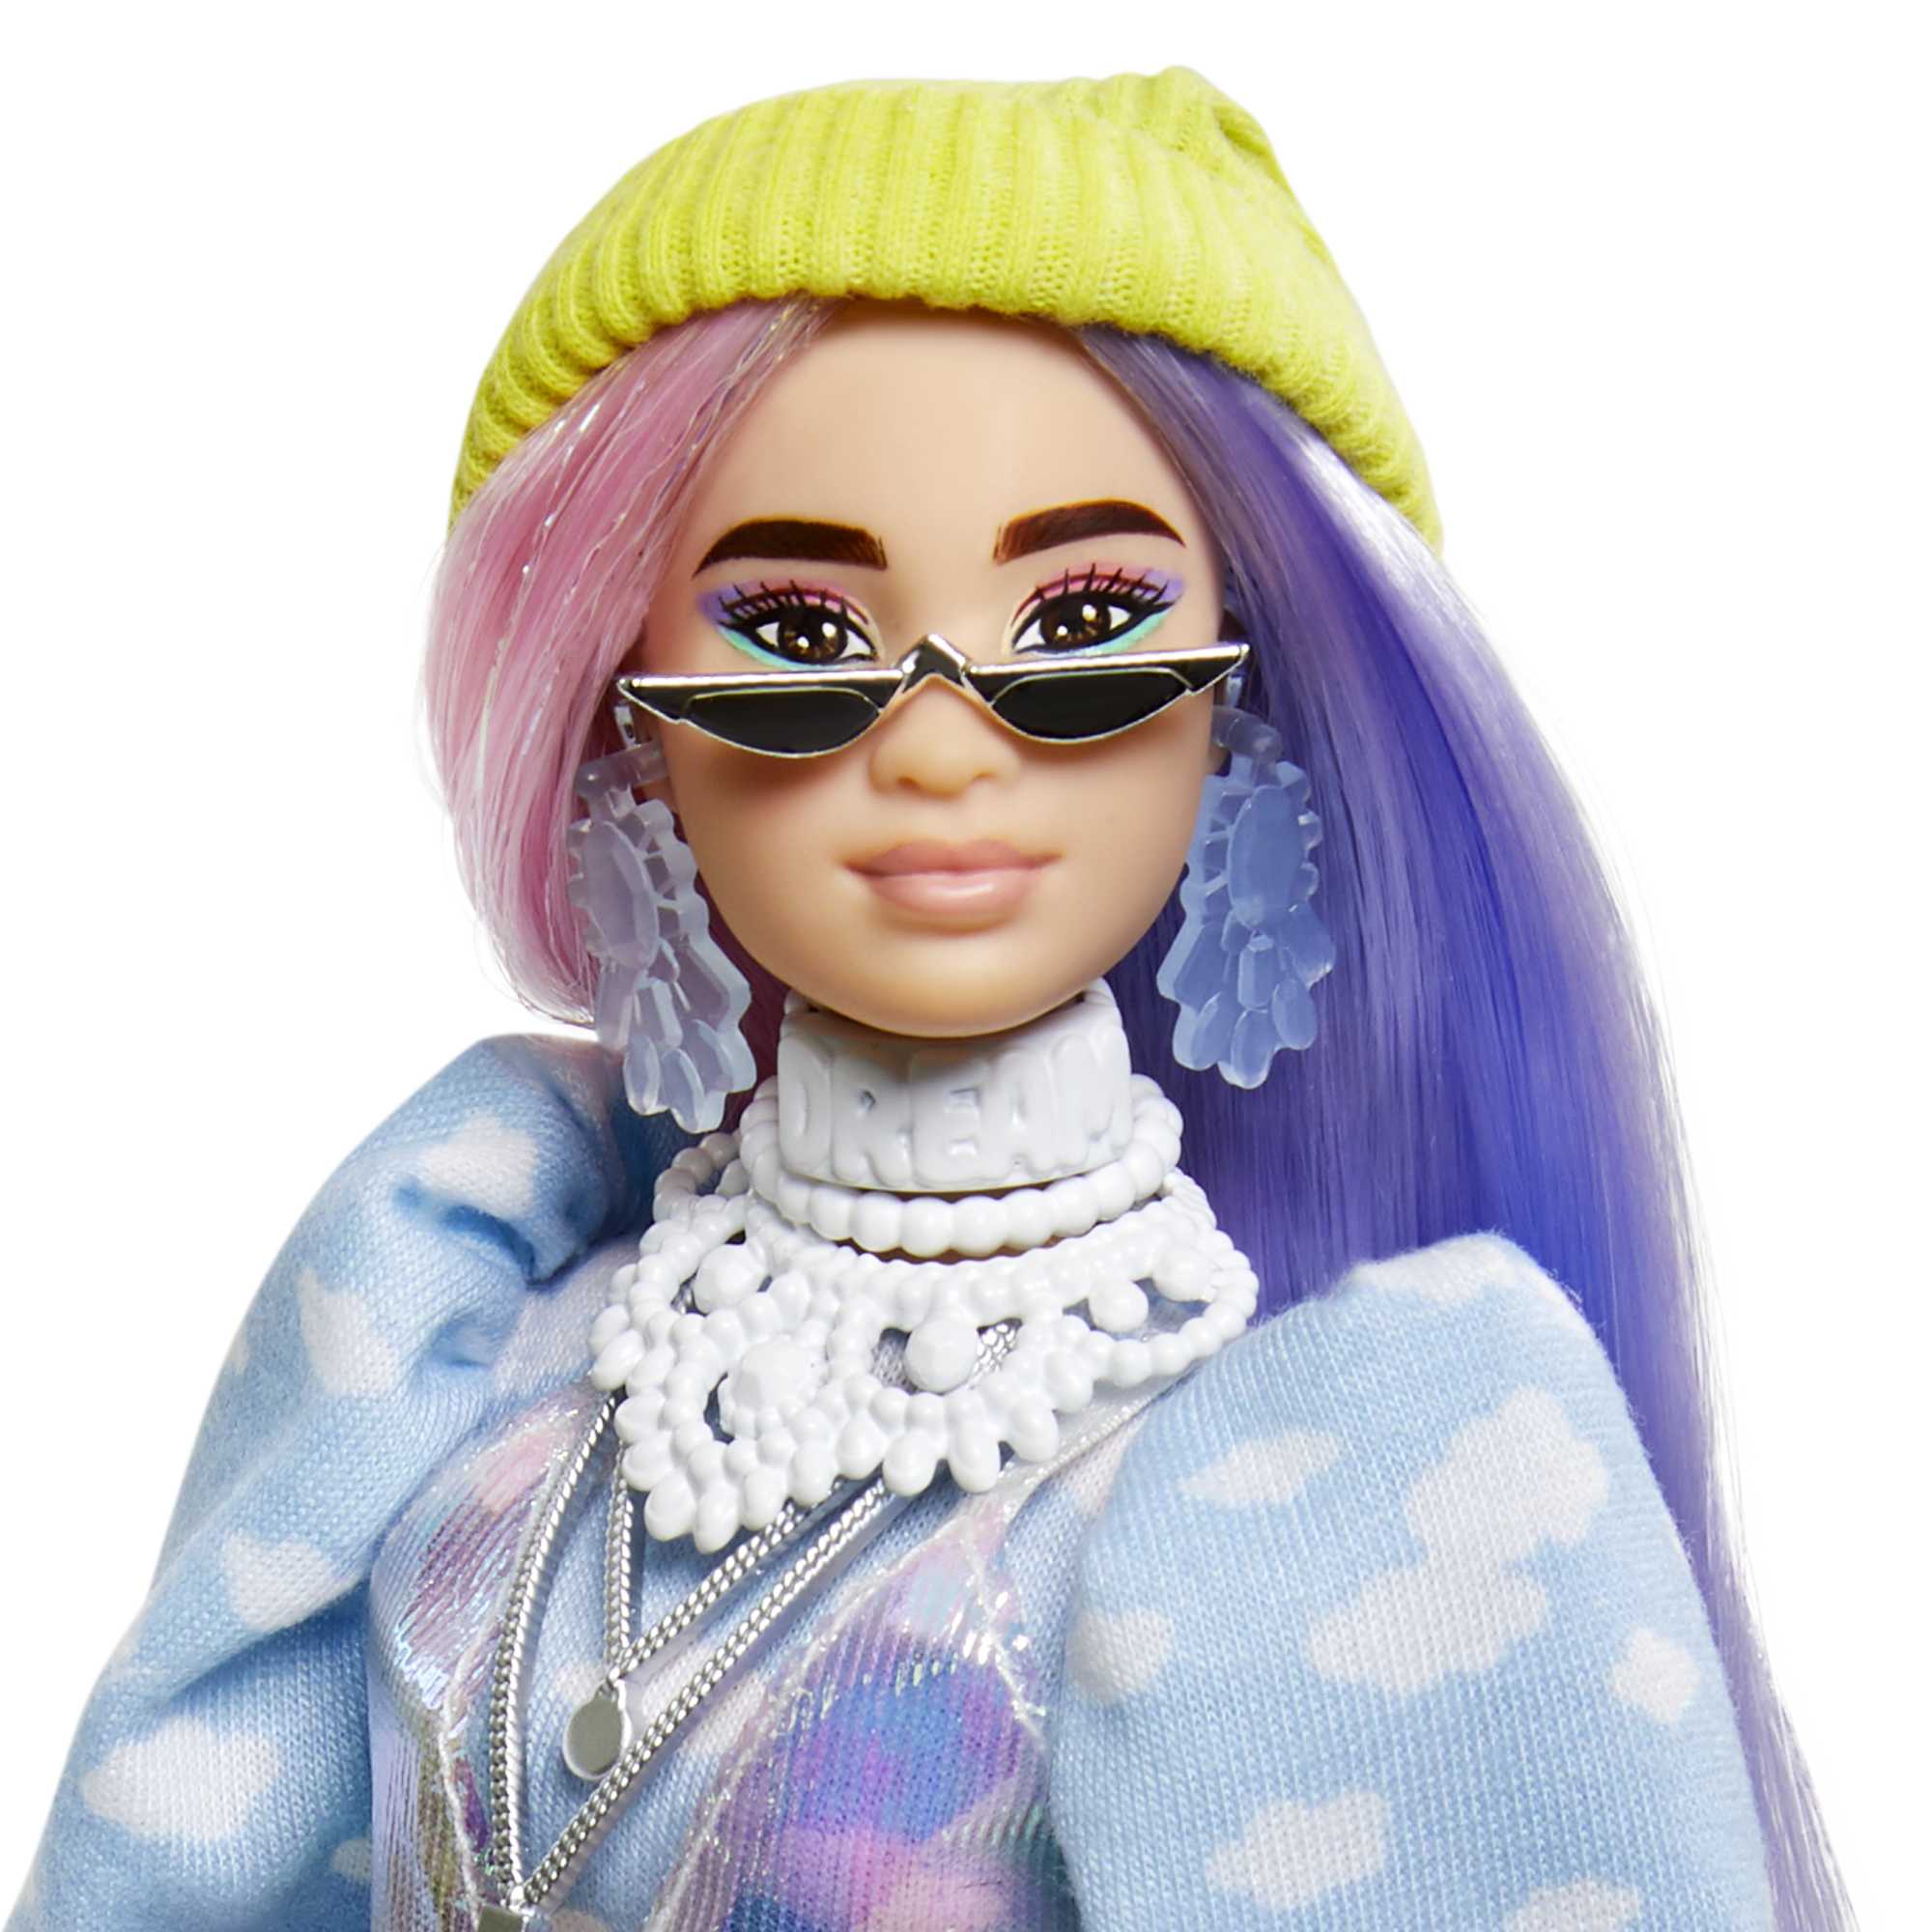 Barbie Extra Fashion Doll with Shimmery Look, Pink & Purple Fantasy Hair, Accessories & Pet - image 6 of 8